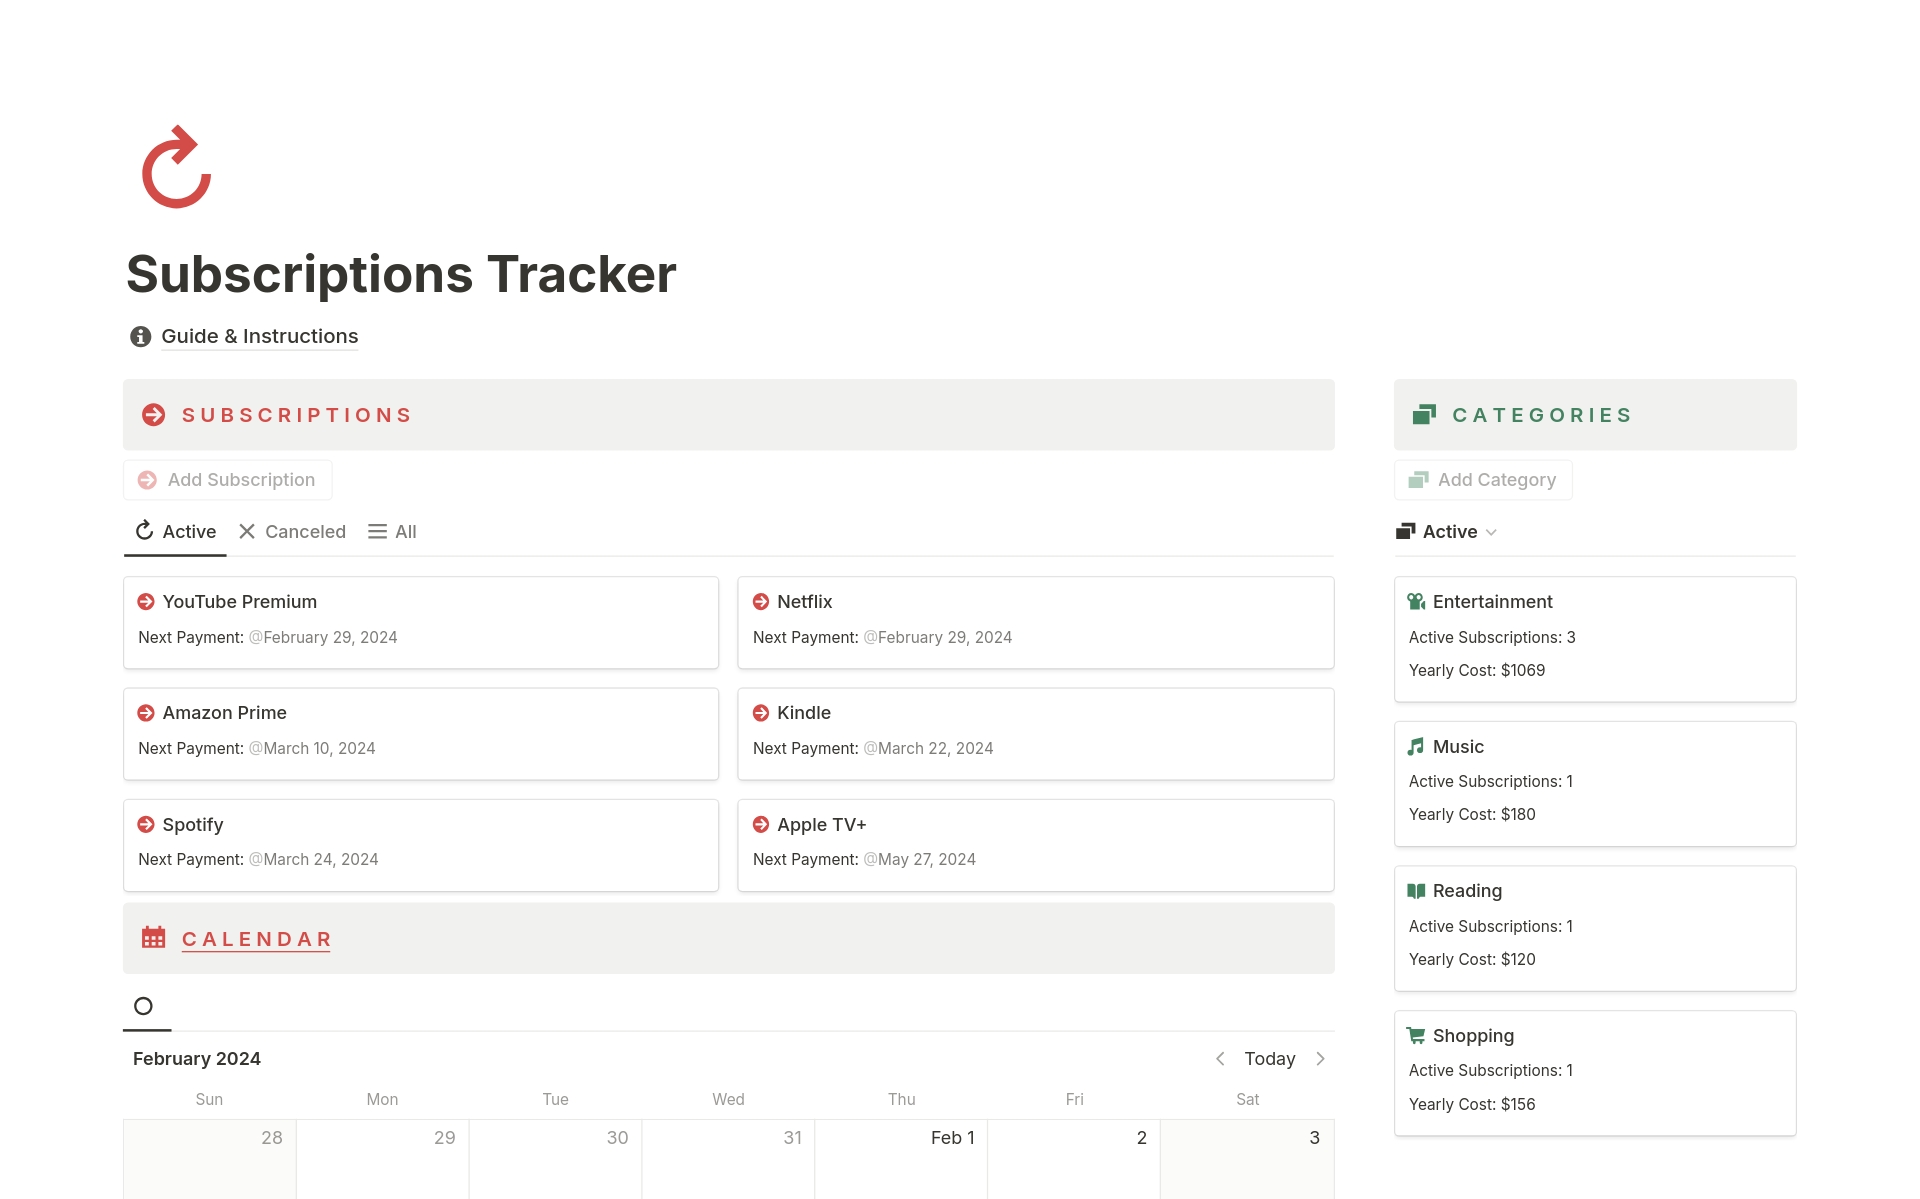 Simplify your subscription management effortlessly! Add or cancel subscriptions seamlessly. Filter by categories for organized tracking. Stay on top of payments with a convenient calendar view of upcoming charges. Streamline your subscription experience—all in one place.